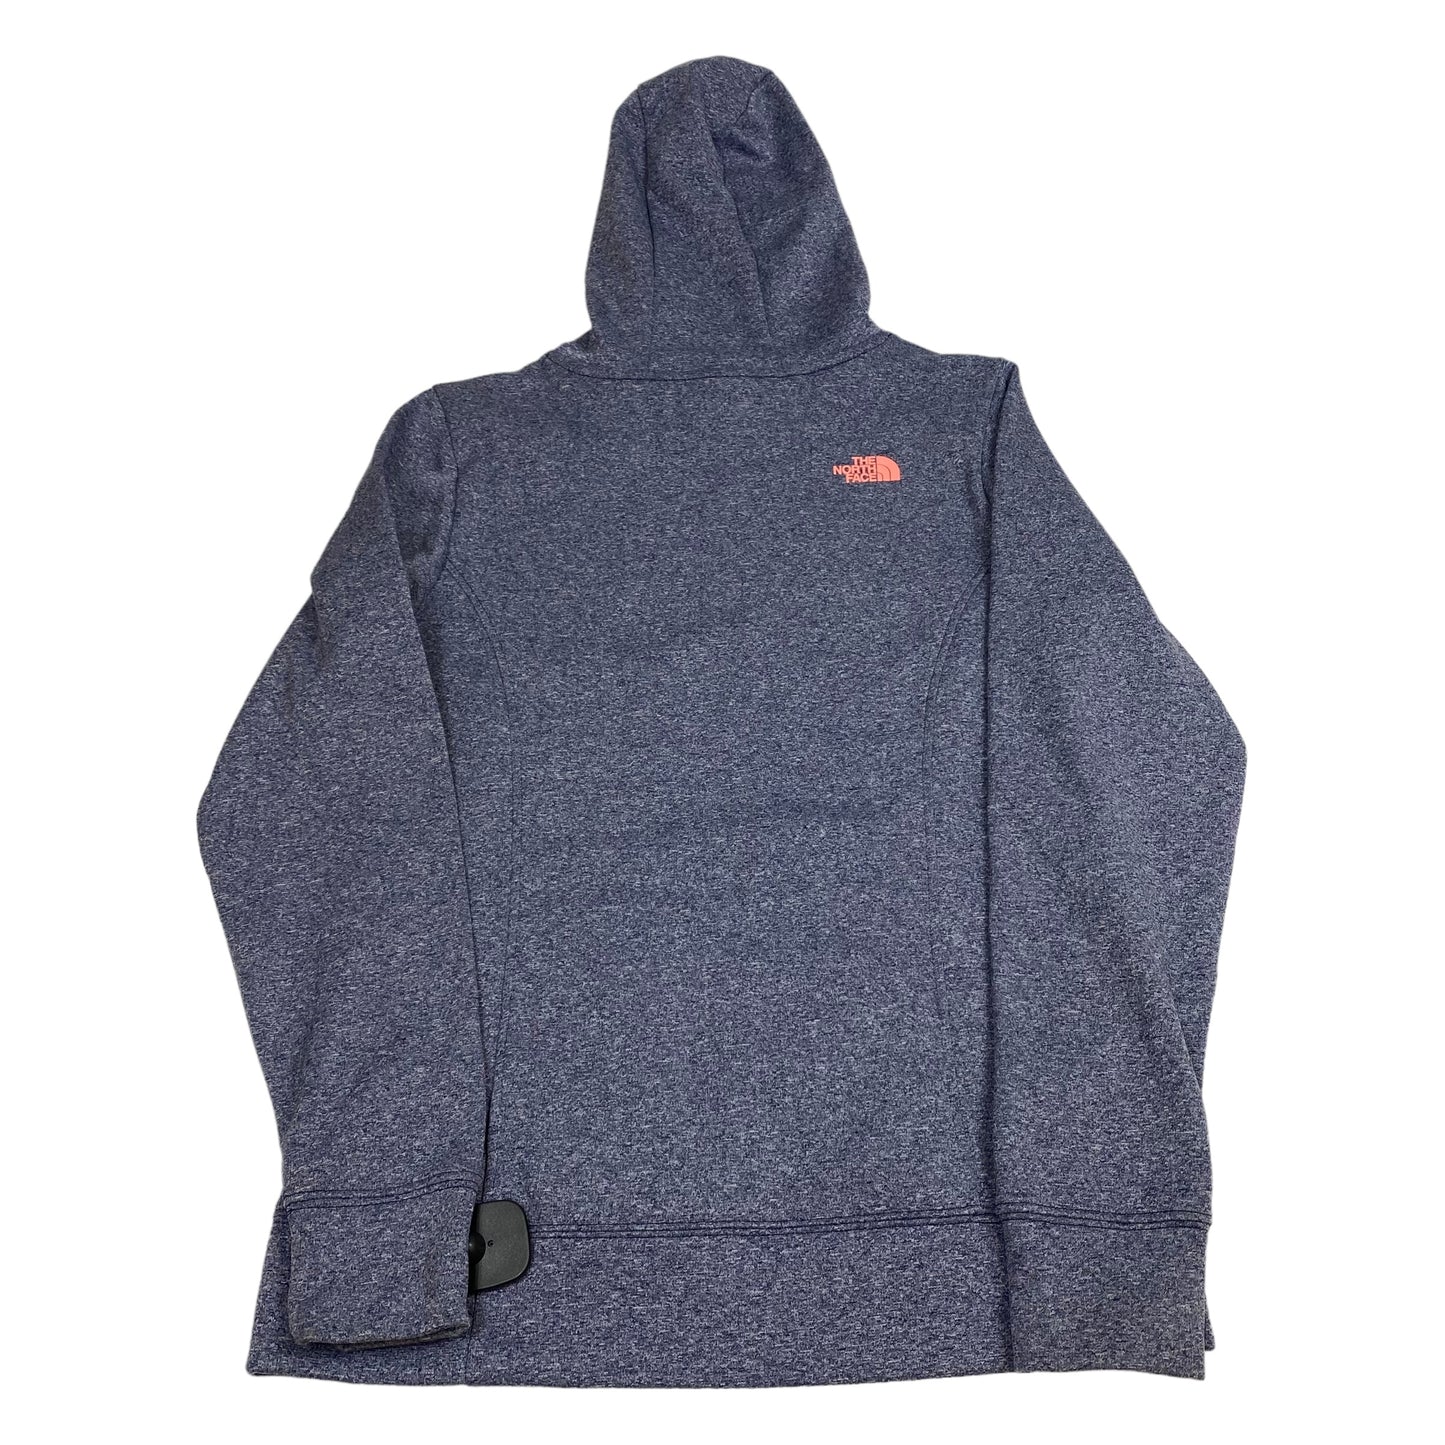 Athletic Sweatshirt Hoodie By North Face  Size: M